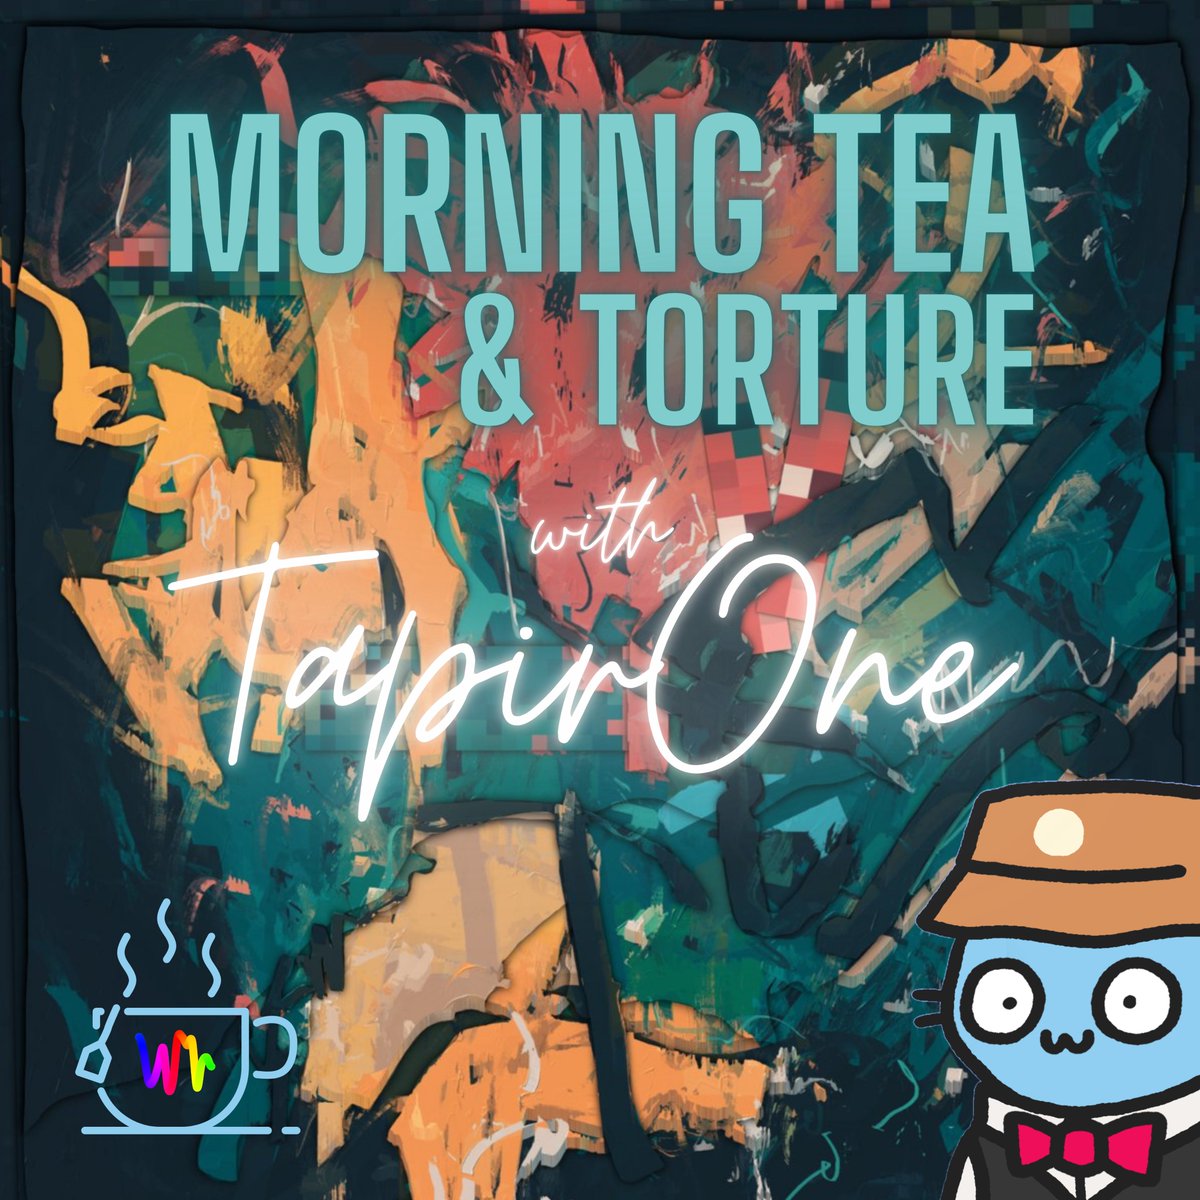 Next Friday, 26 April, a new episode of Morning Tea & Torture will be released. This is going to be a VERY special episode, more details to follow in the coming days. 👀 Here's a teaser cover image for y'all. Can you guess who my next guest will be? 🎙️😎